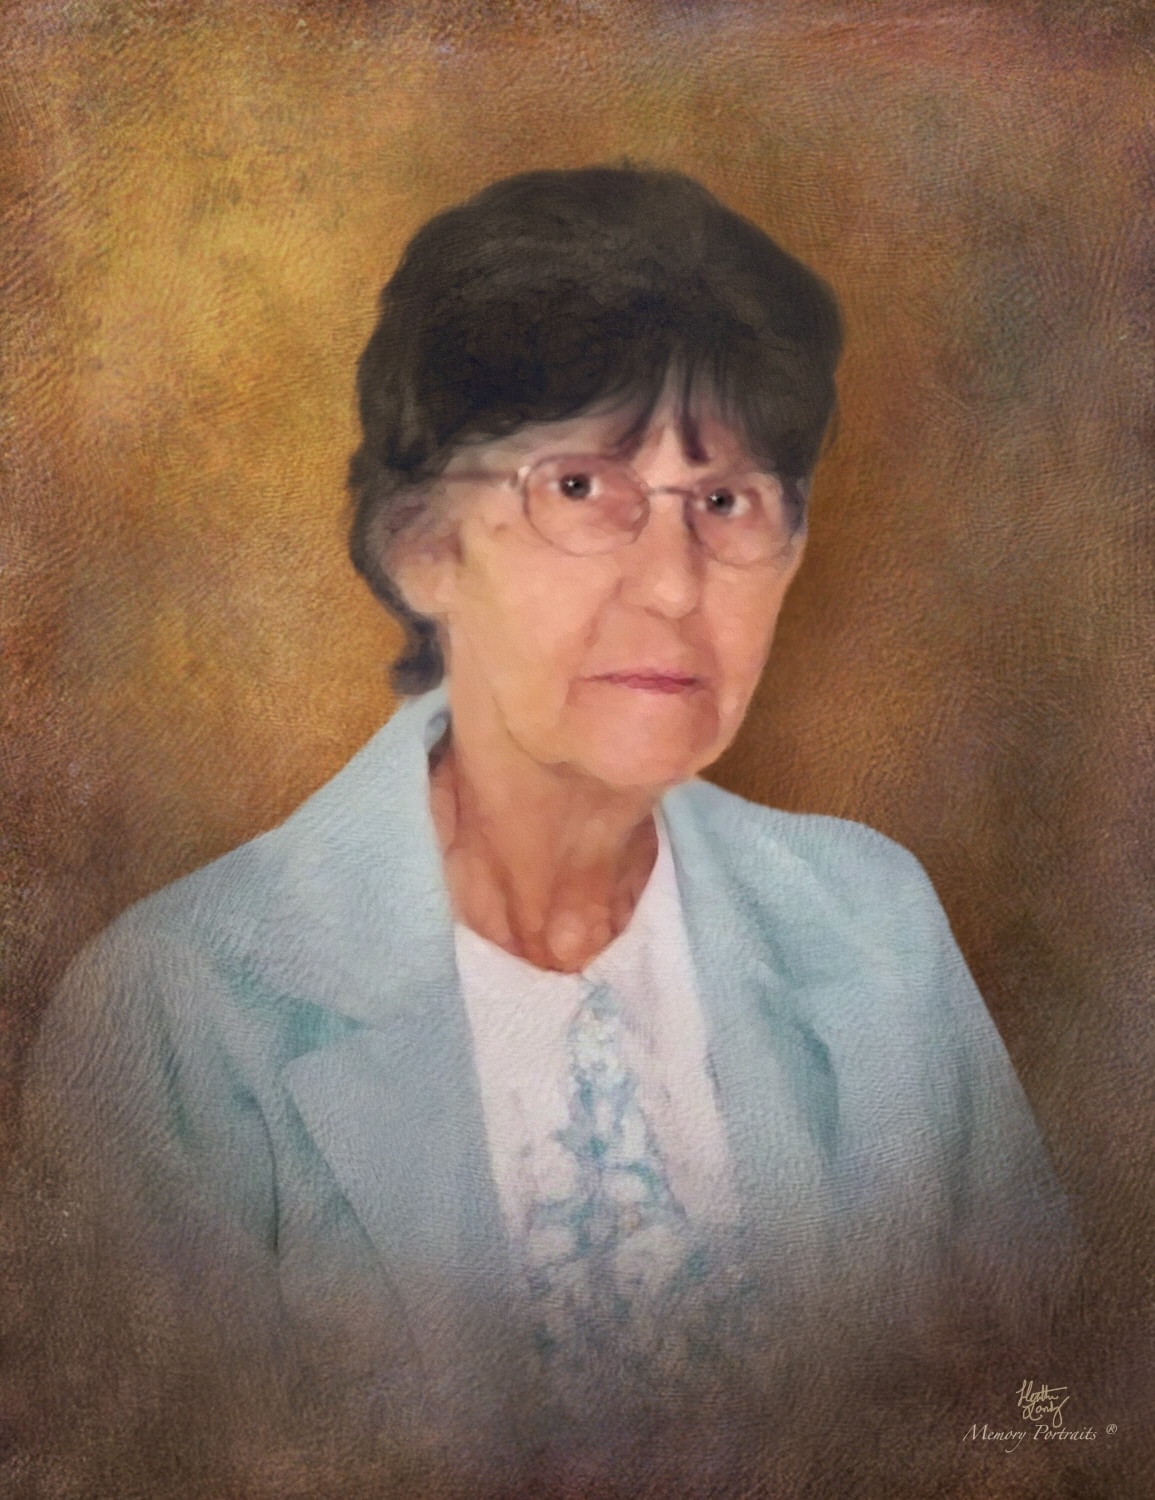 Obituary information for Bonnie